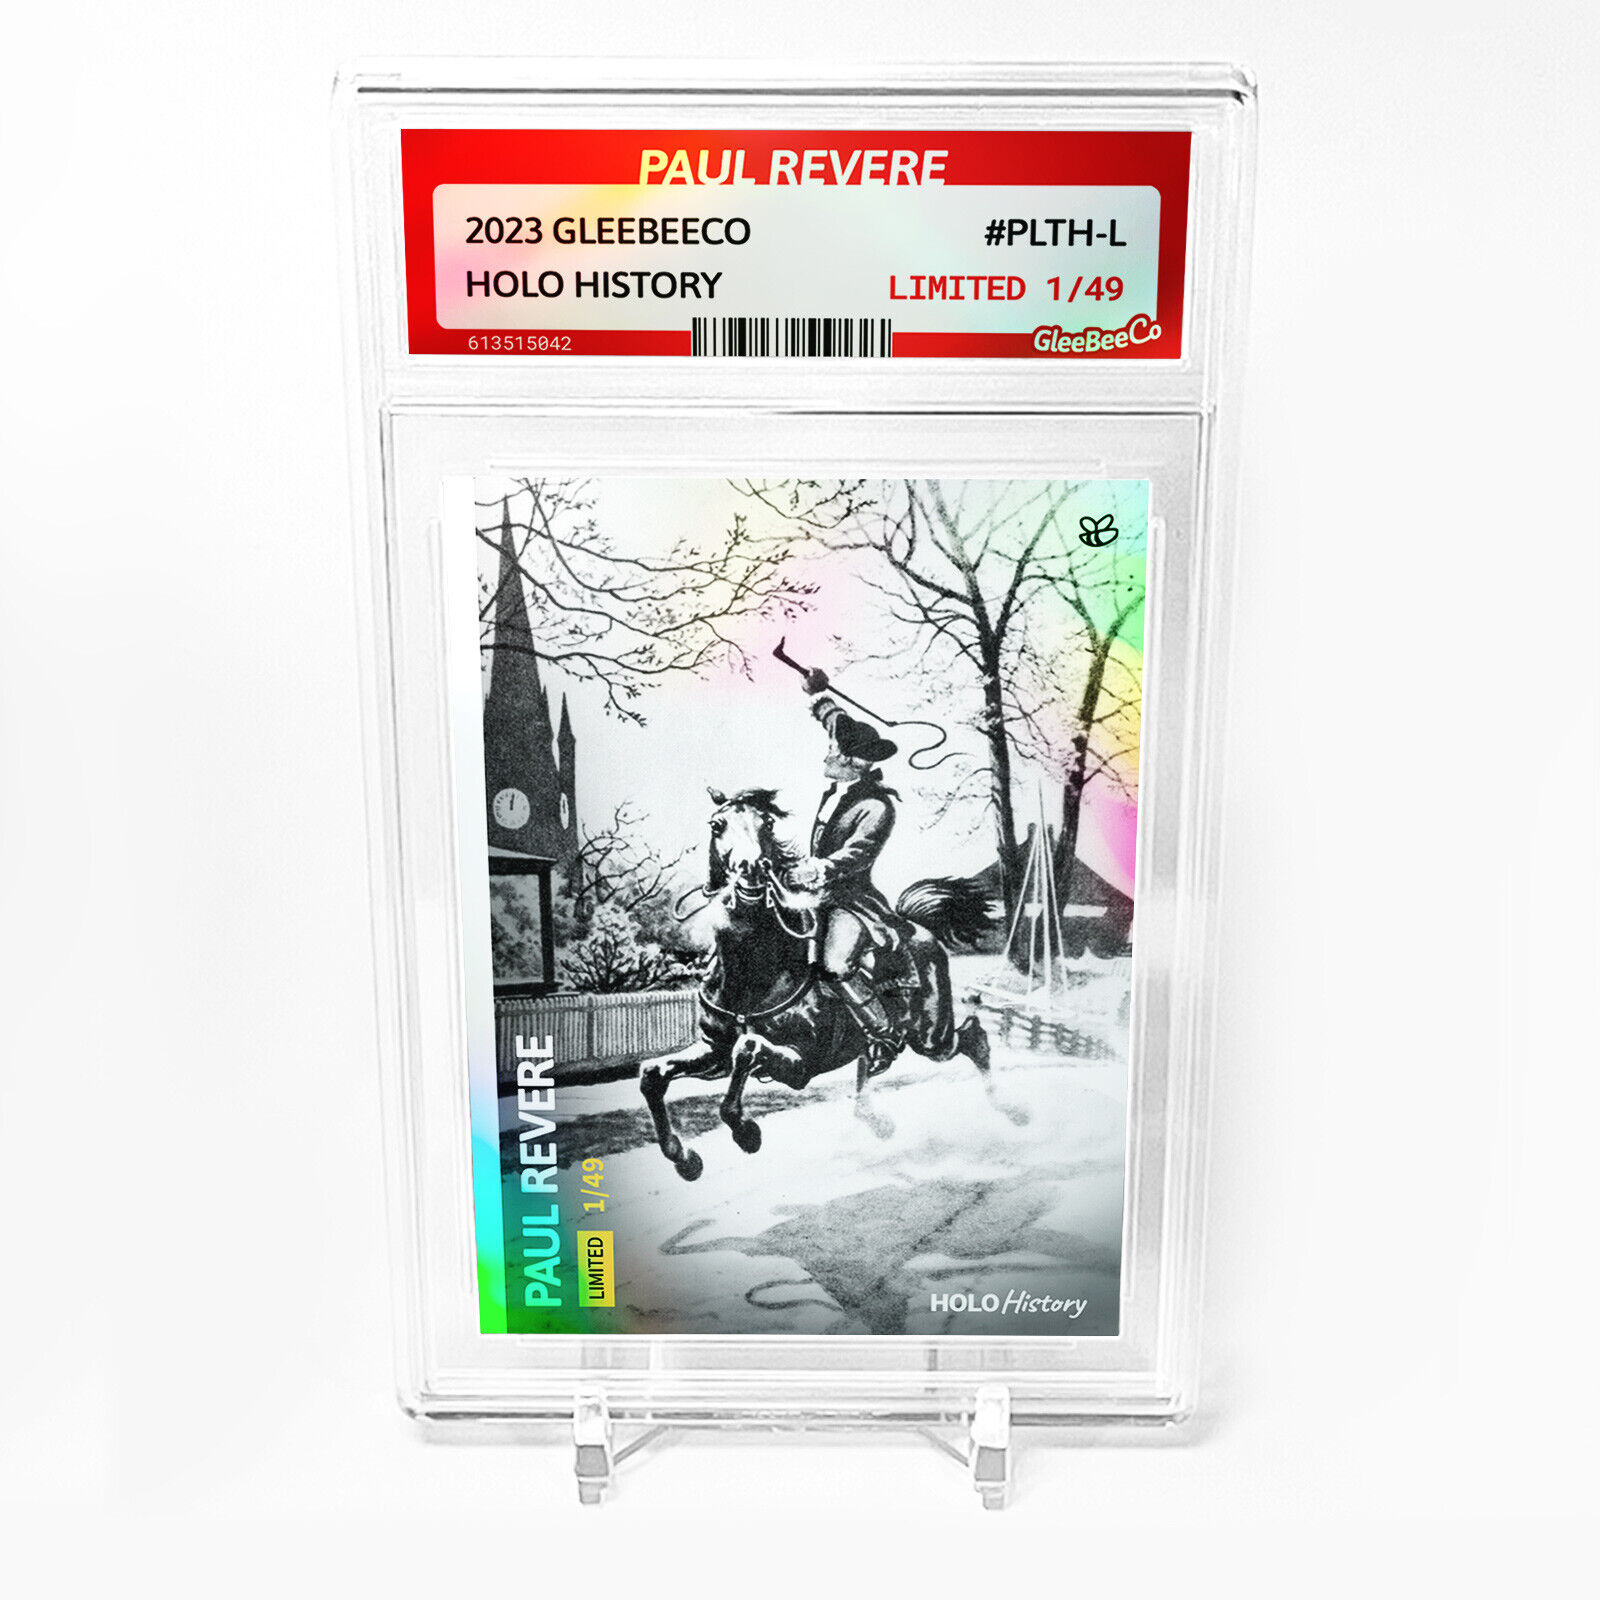 PAUL REVERE Card 2023 GleeBeeCo Holo History #PLTH-L Limited to Only /49